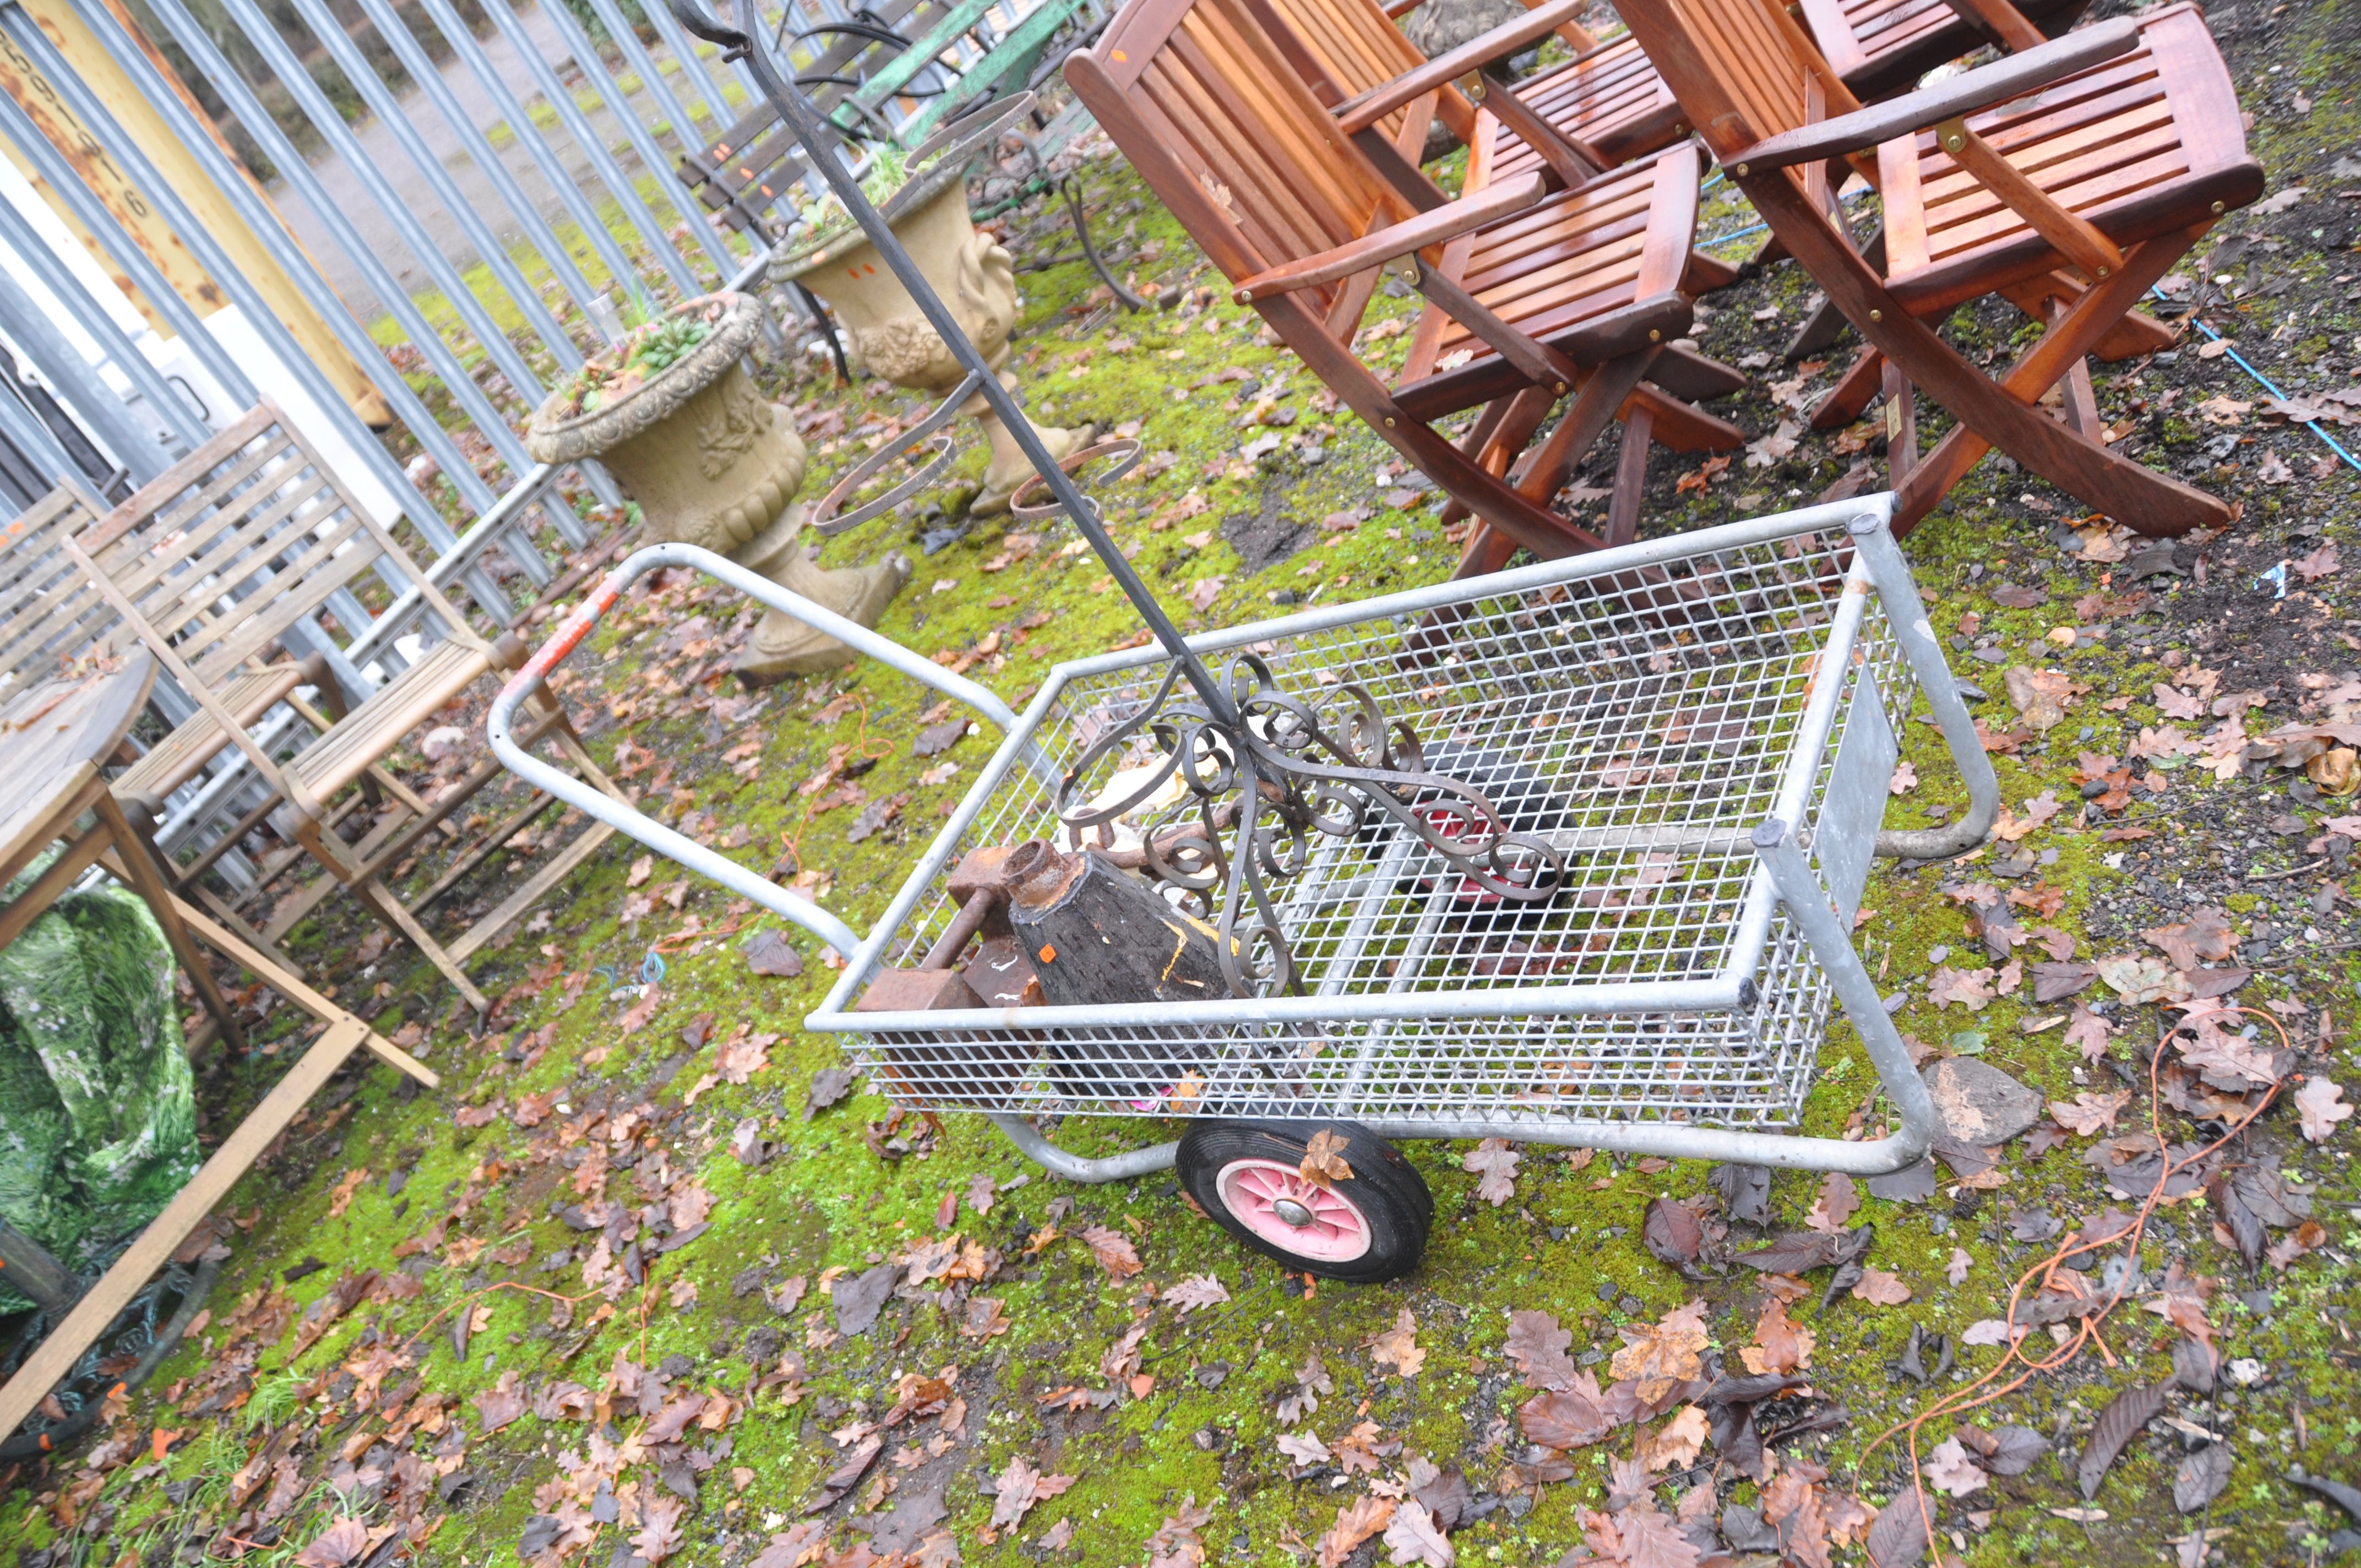 A GALVANISED STEEL GARDEN TROLLEY (basket length 100cm) a wrought iron plant stand, a vintage rain